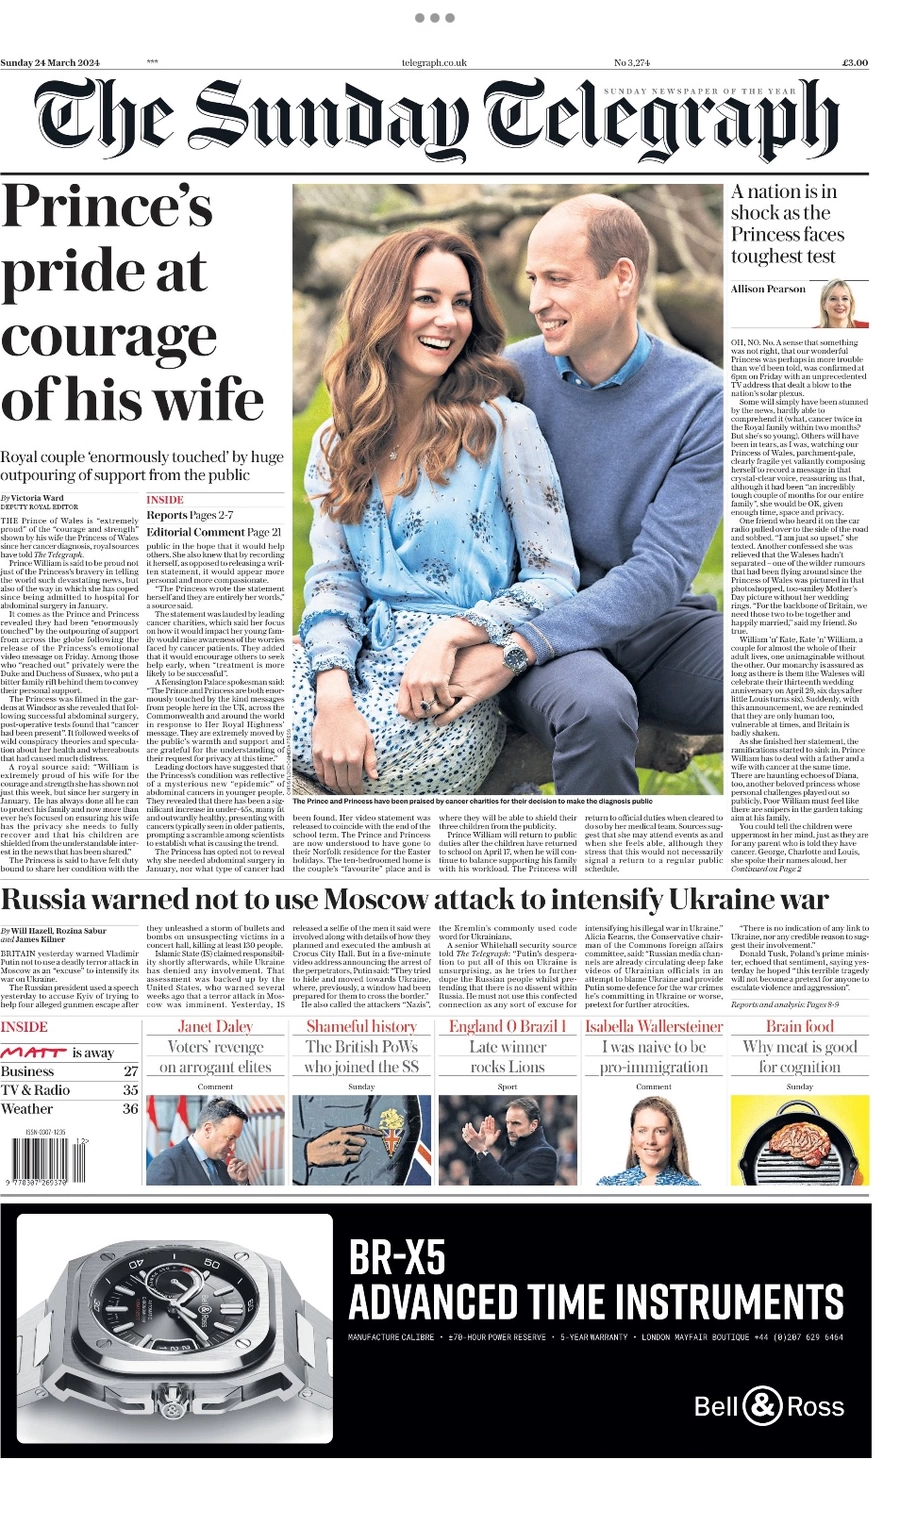 the daily telegraph 004940971 - WTX News Breaking News, fashion & Culture from around the World - Daily News Briefings -Finance, Business, Politics & Sports News